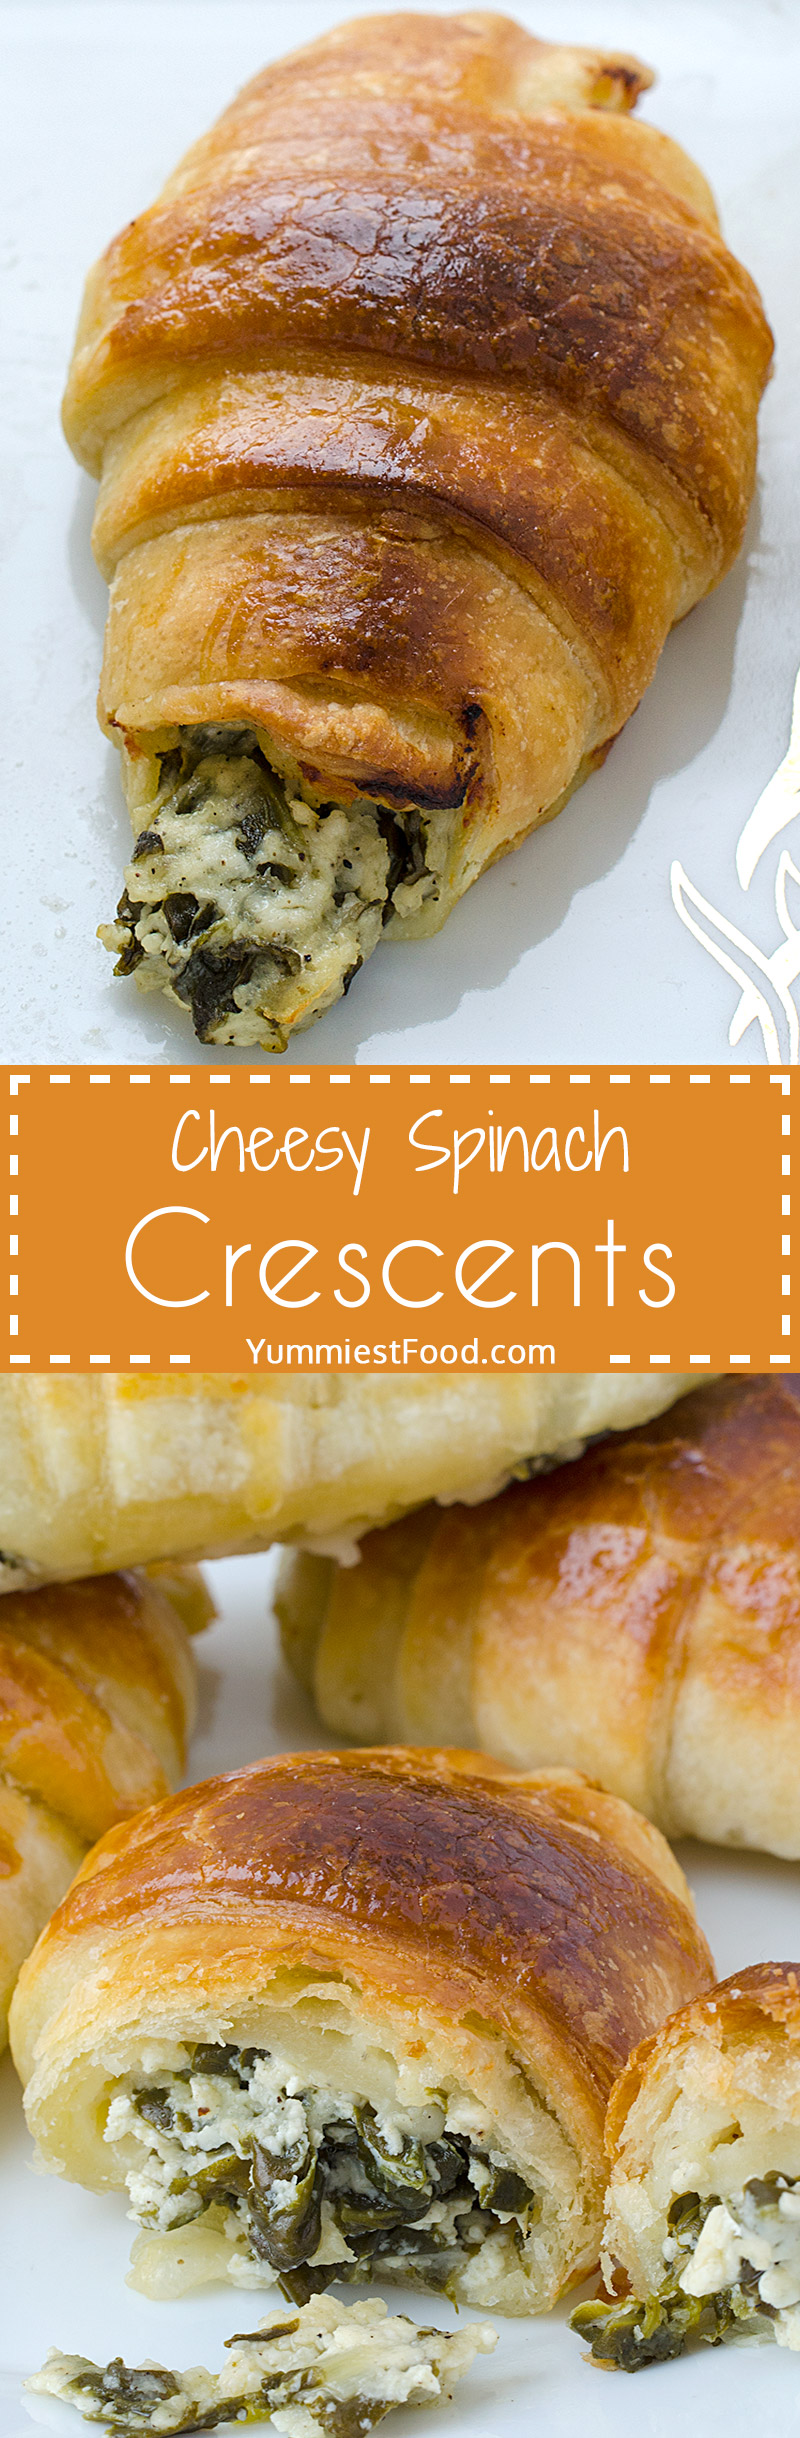 Cheesy Spinach Crescents - puff pastry, so delicious and soft! You you need only 20 minutes for them.